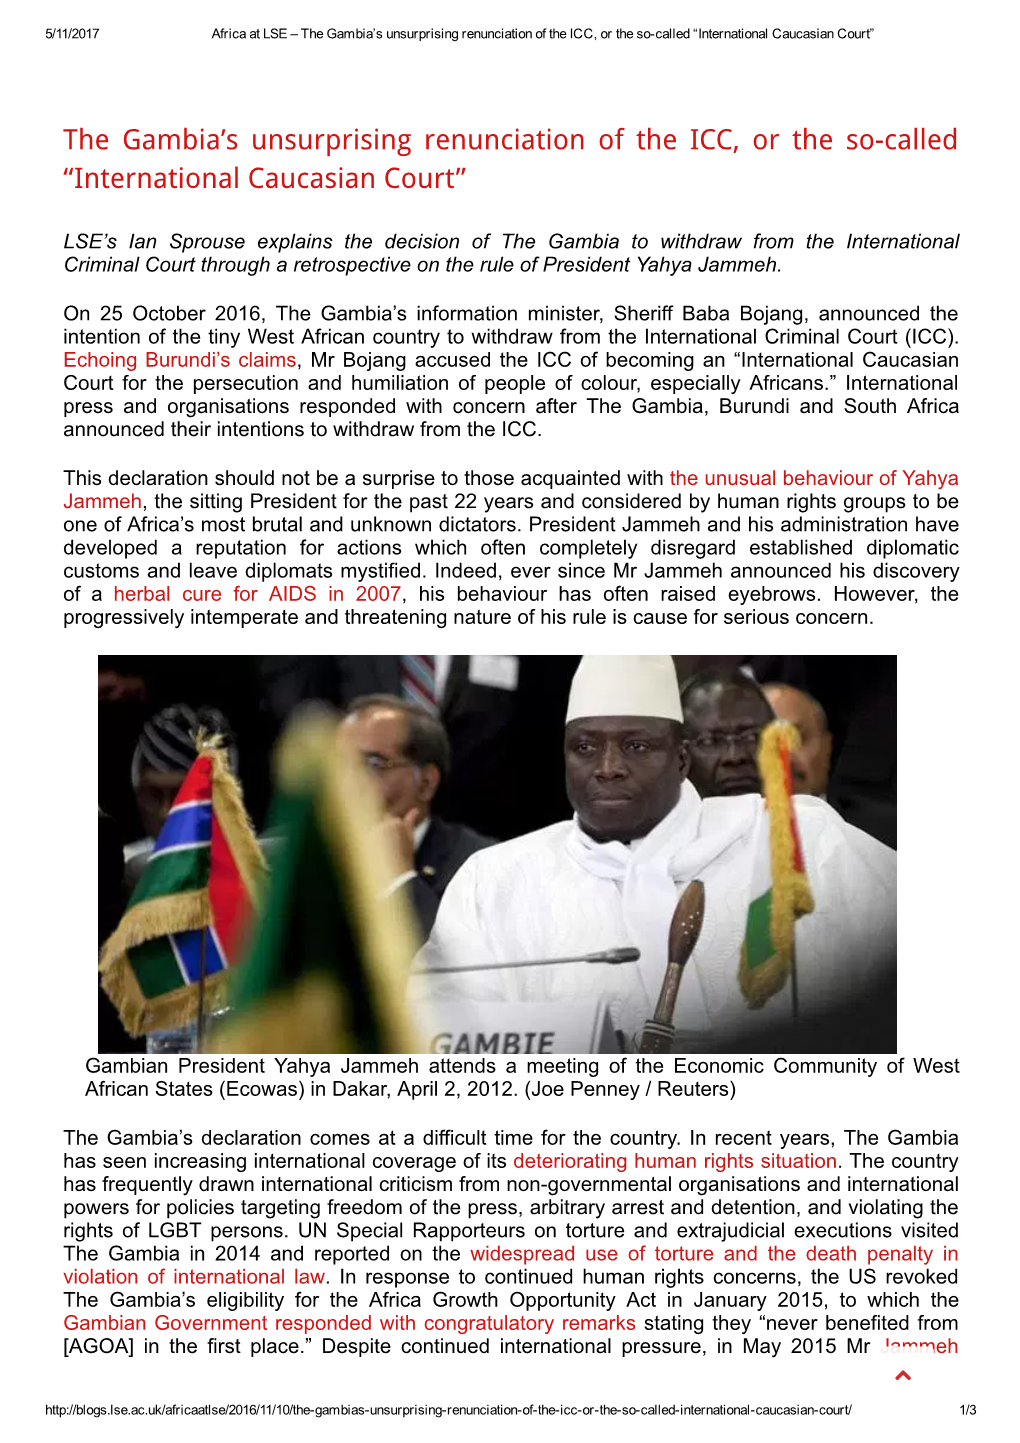 The Gambia's Unsurprising Renunciation of the ICC, Or the So